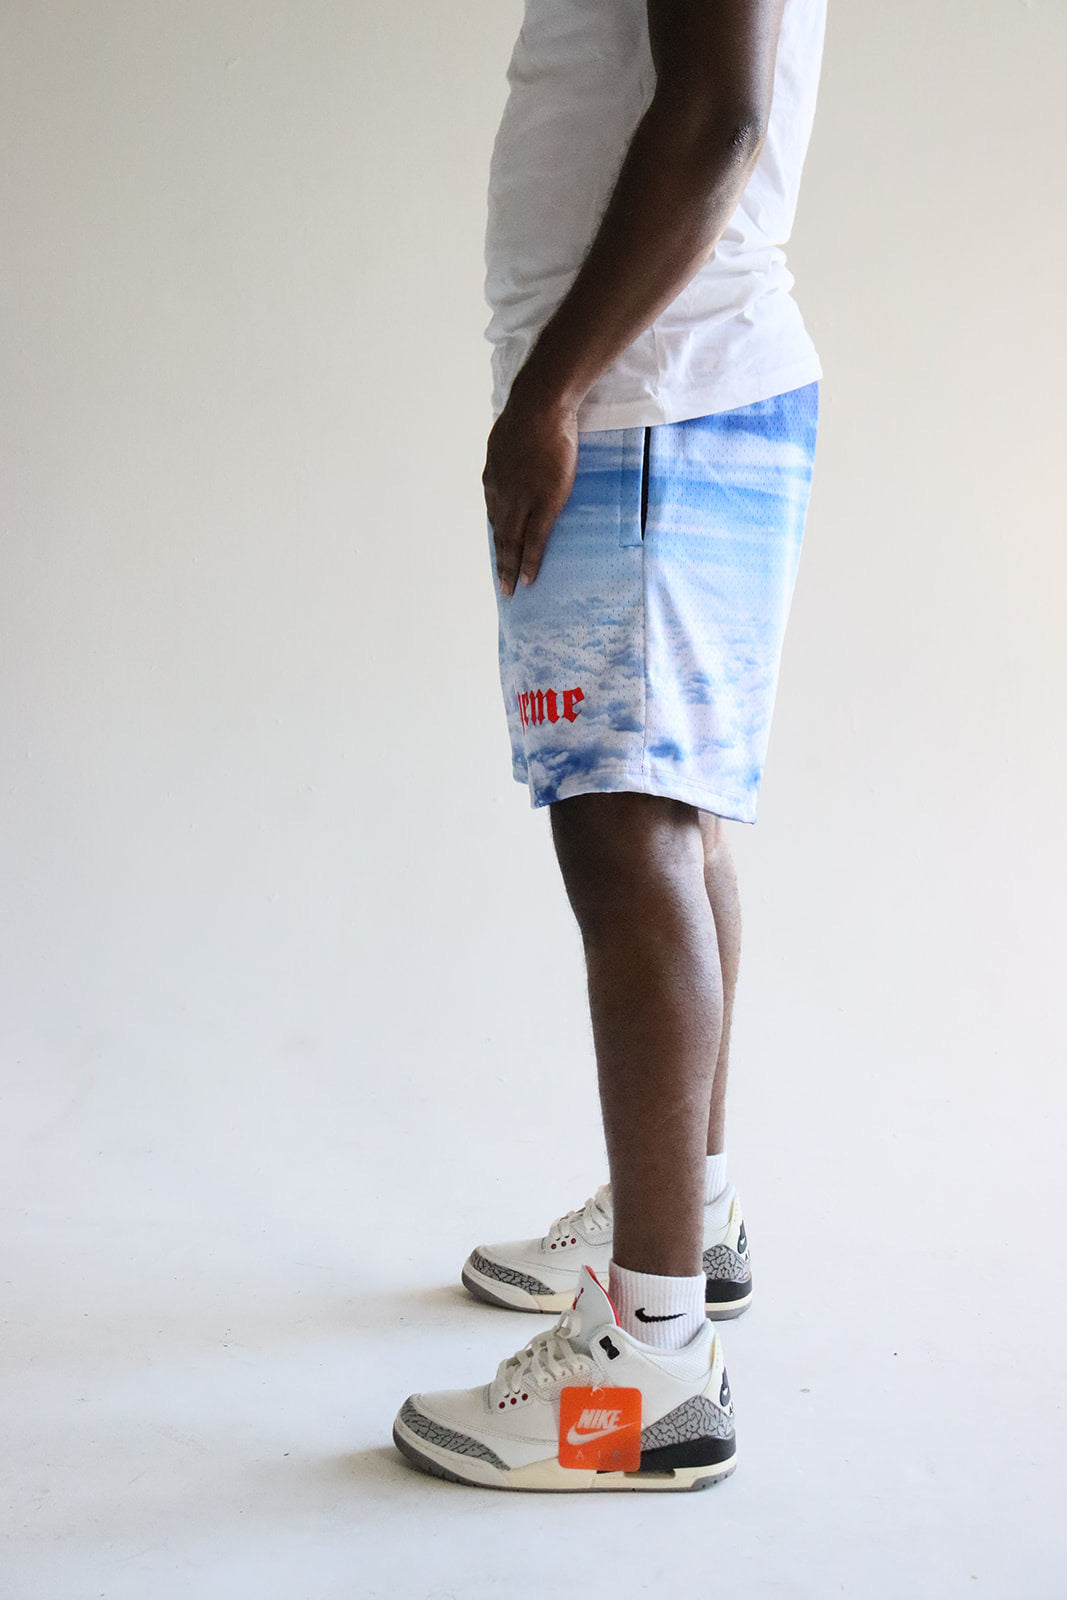 Men's graphic mesh shorts with a picture of sky clouds